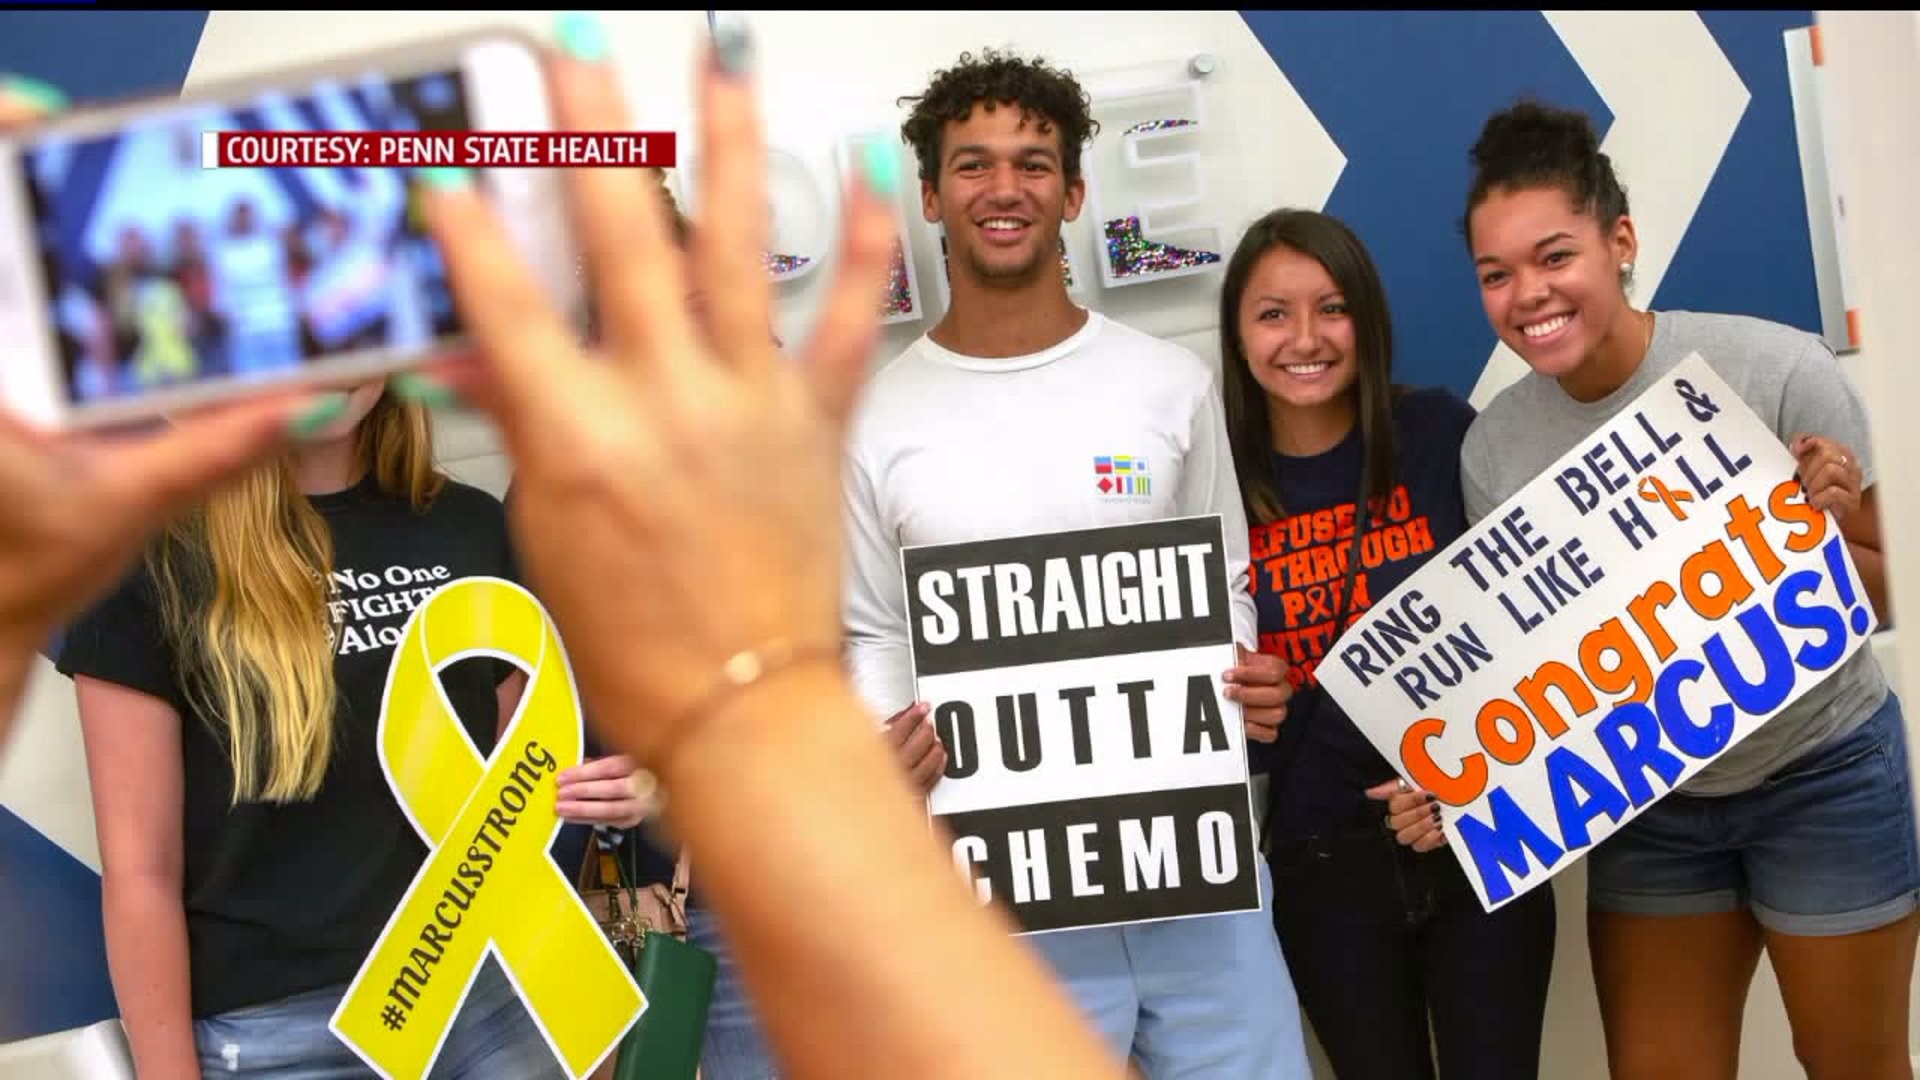 Northeastern graduate completes chemotherapy after 3-year journey, the milestone sparking mixed emotions